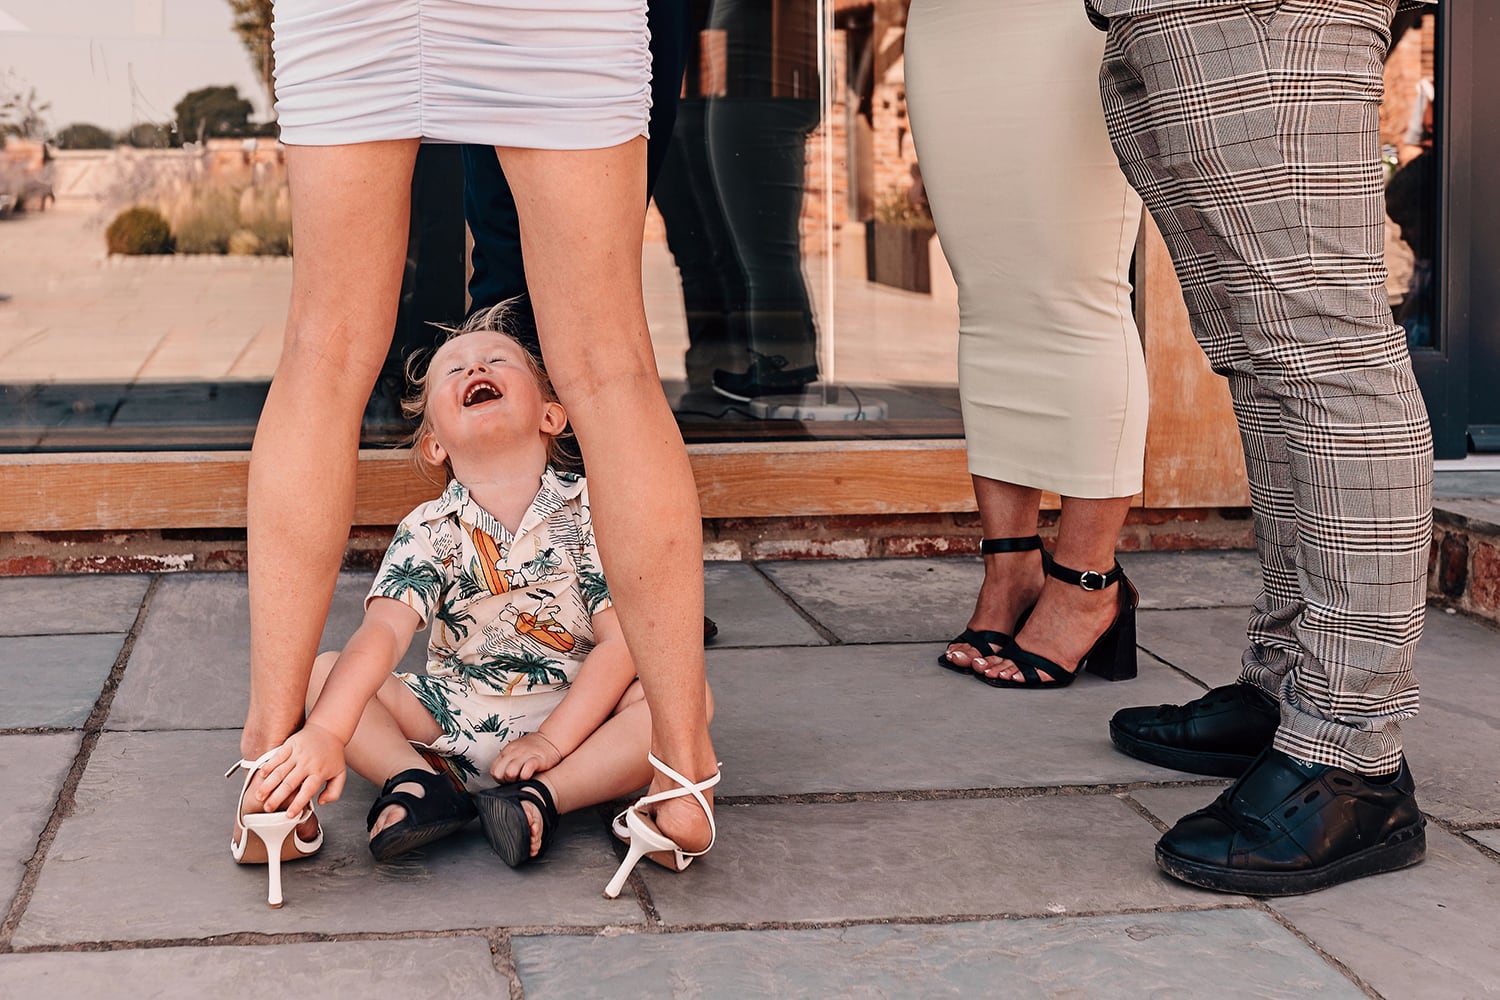 Funny photograph of a small child looking up someones skirt at a wedding